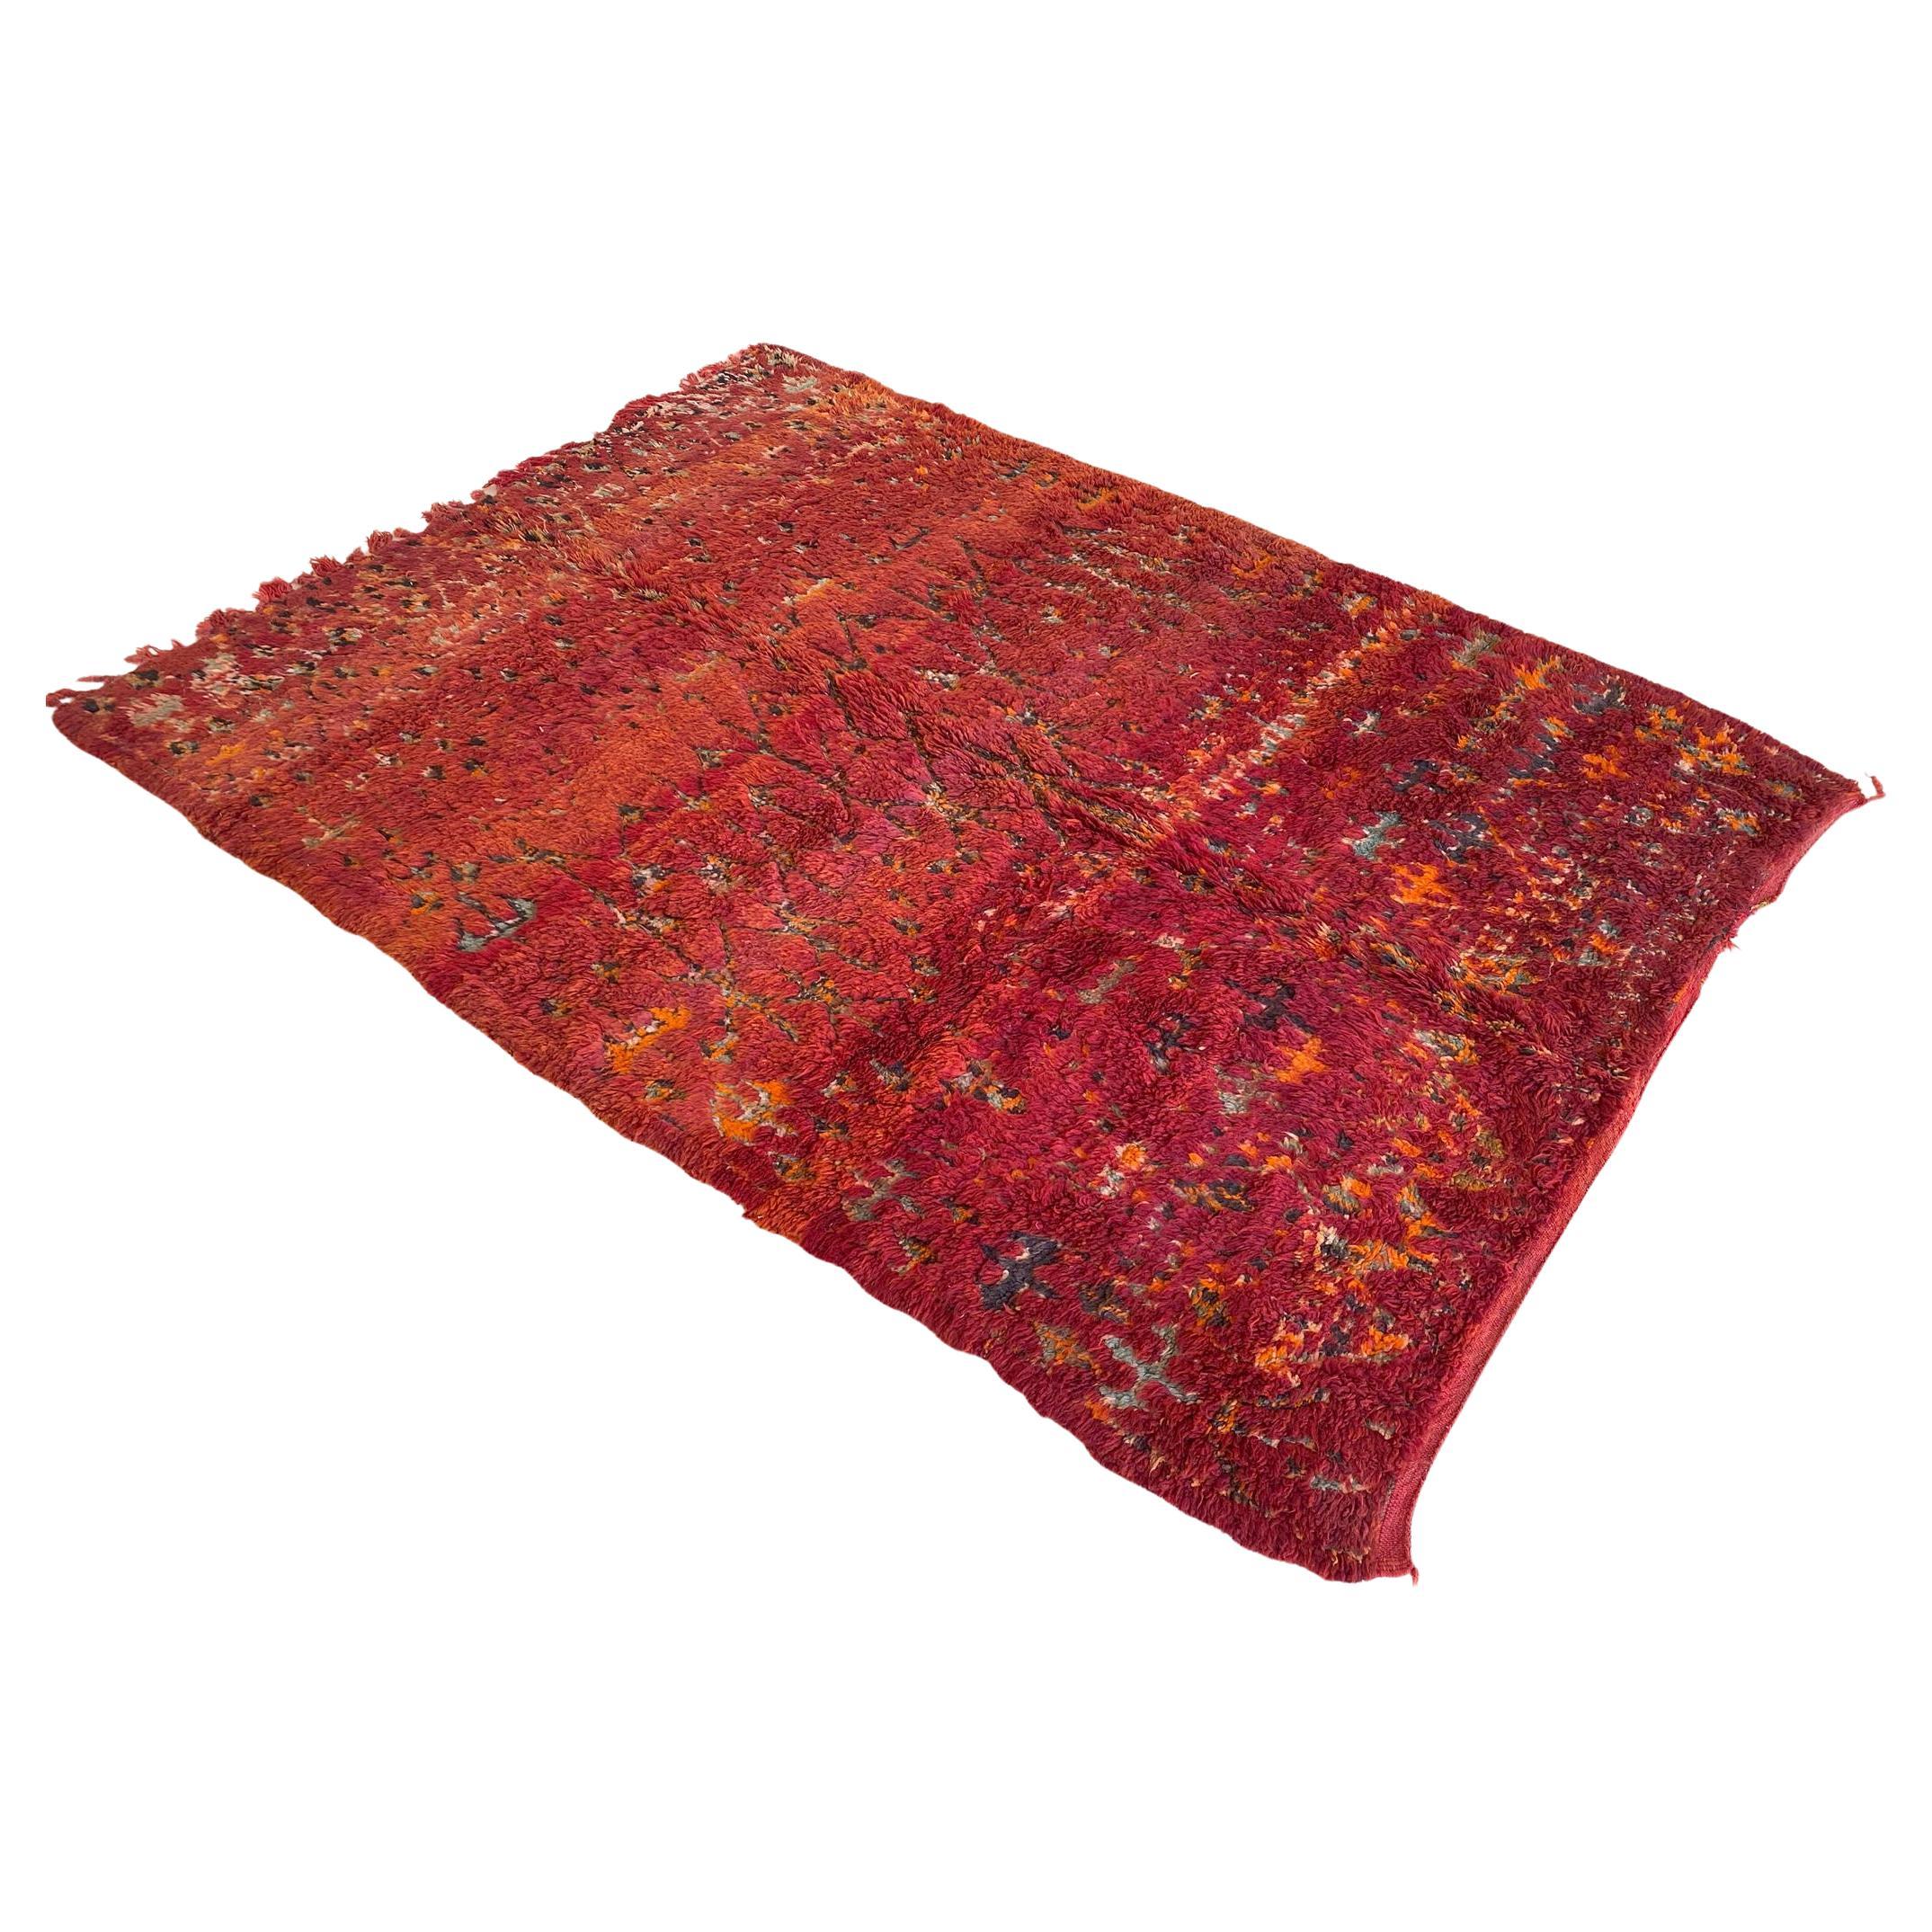 Vintage Moroccan Zayane rug - Red - 7x9.9feet / 216x302cm For Sale